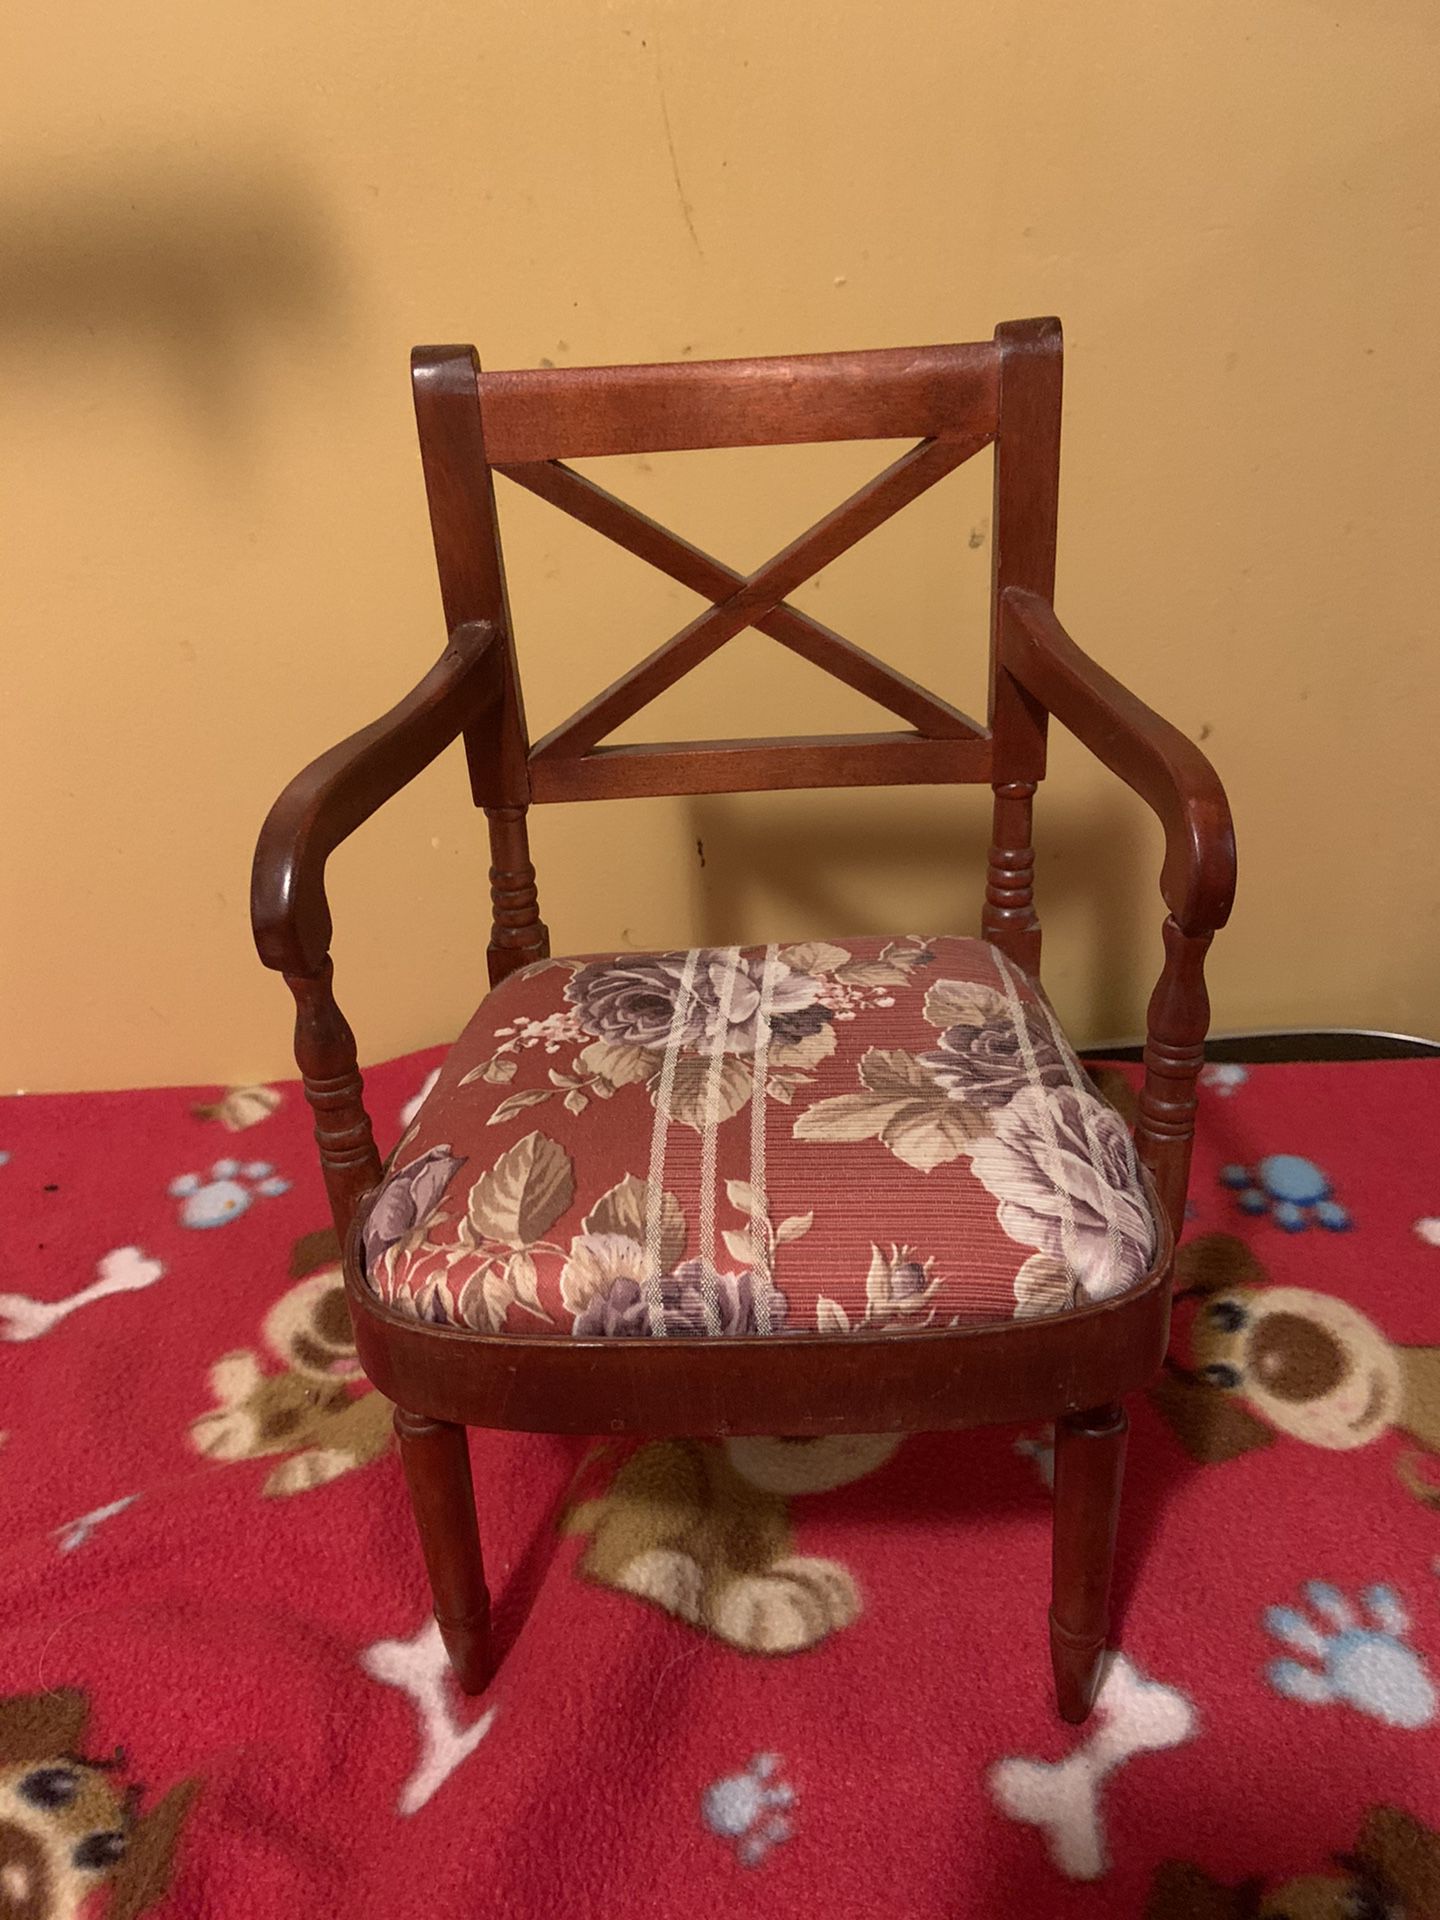 Upholstered chair for an 18” doll